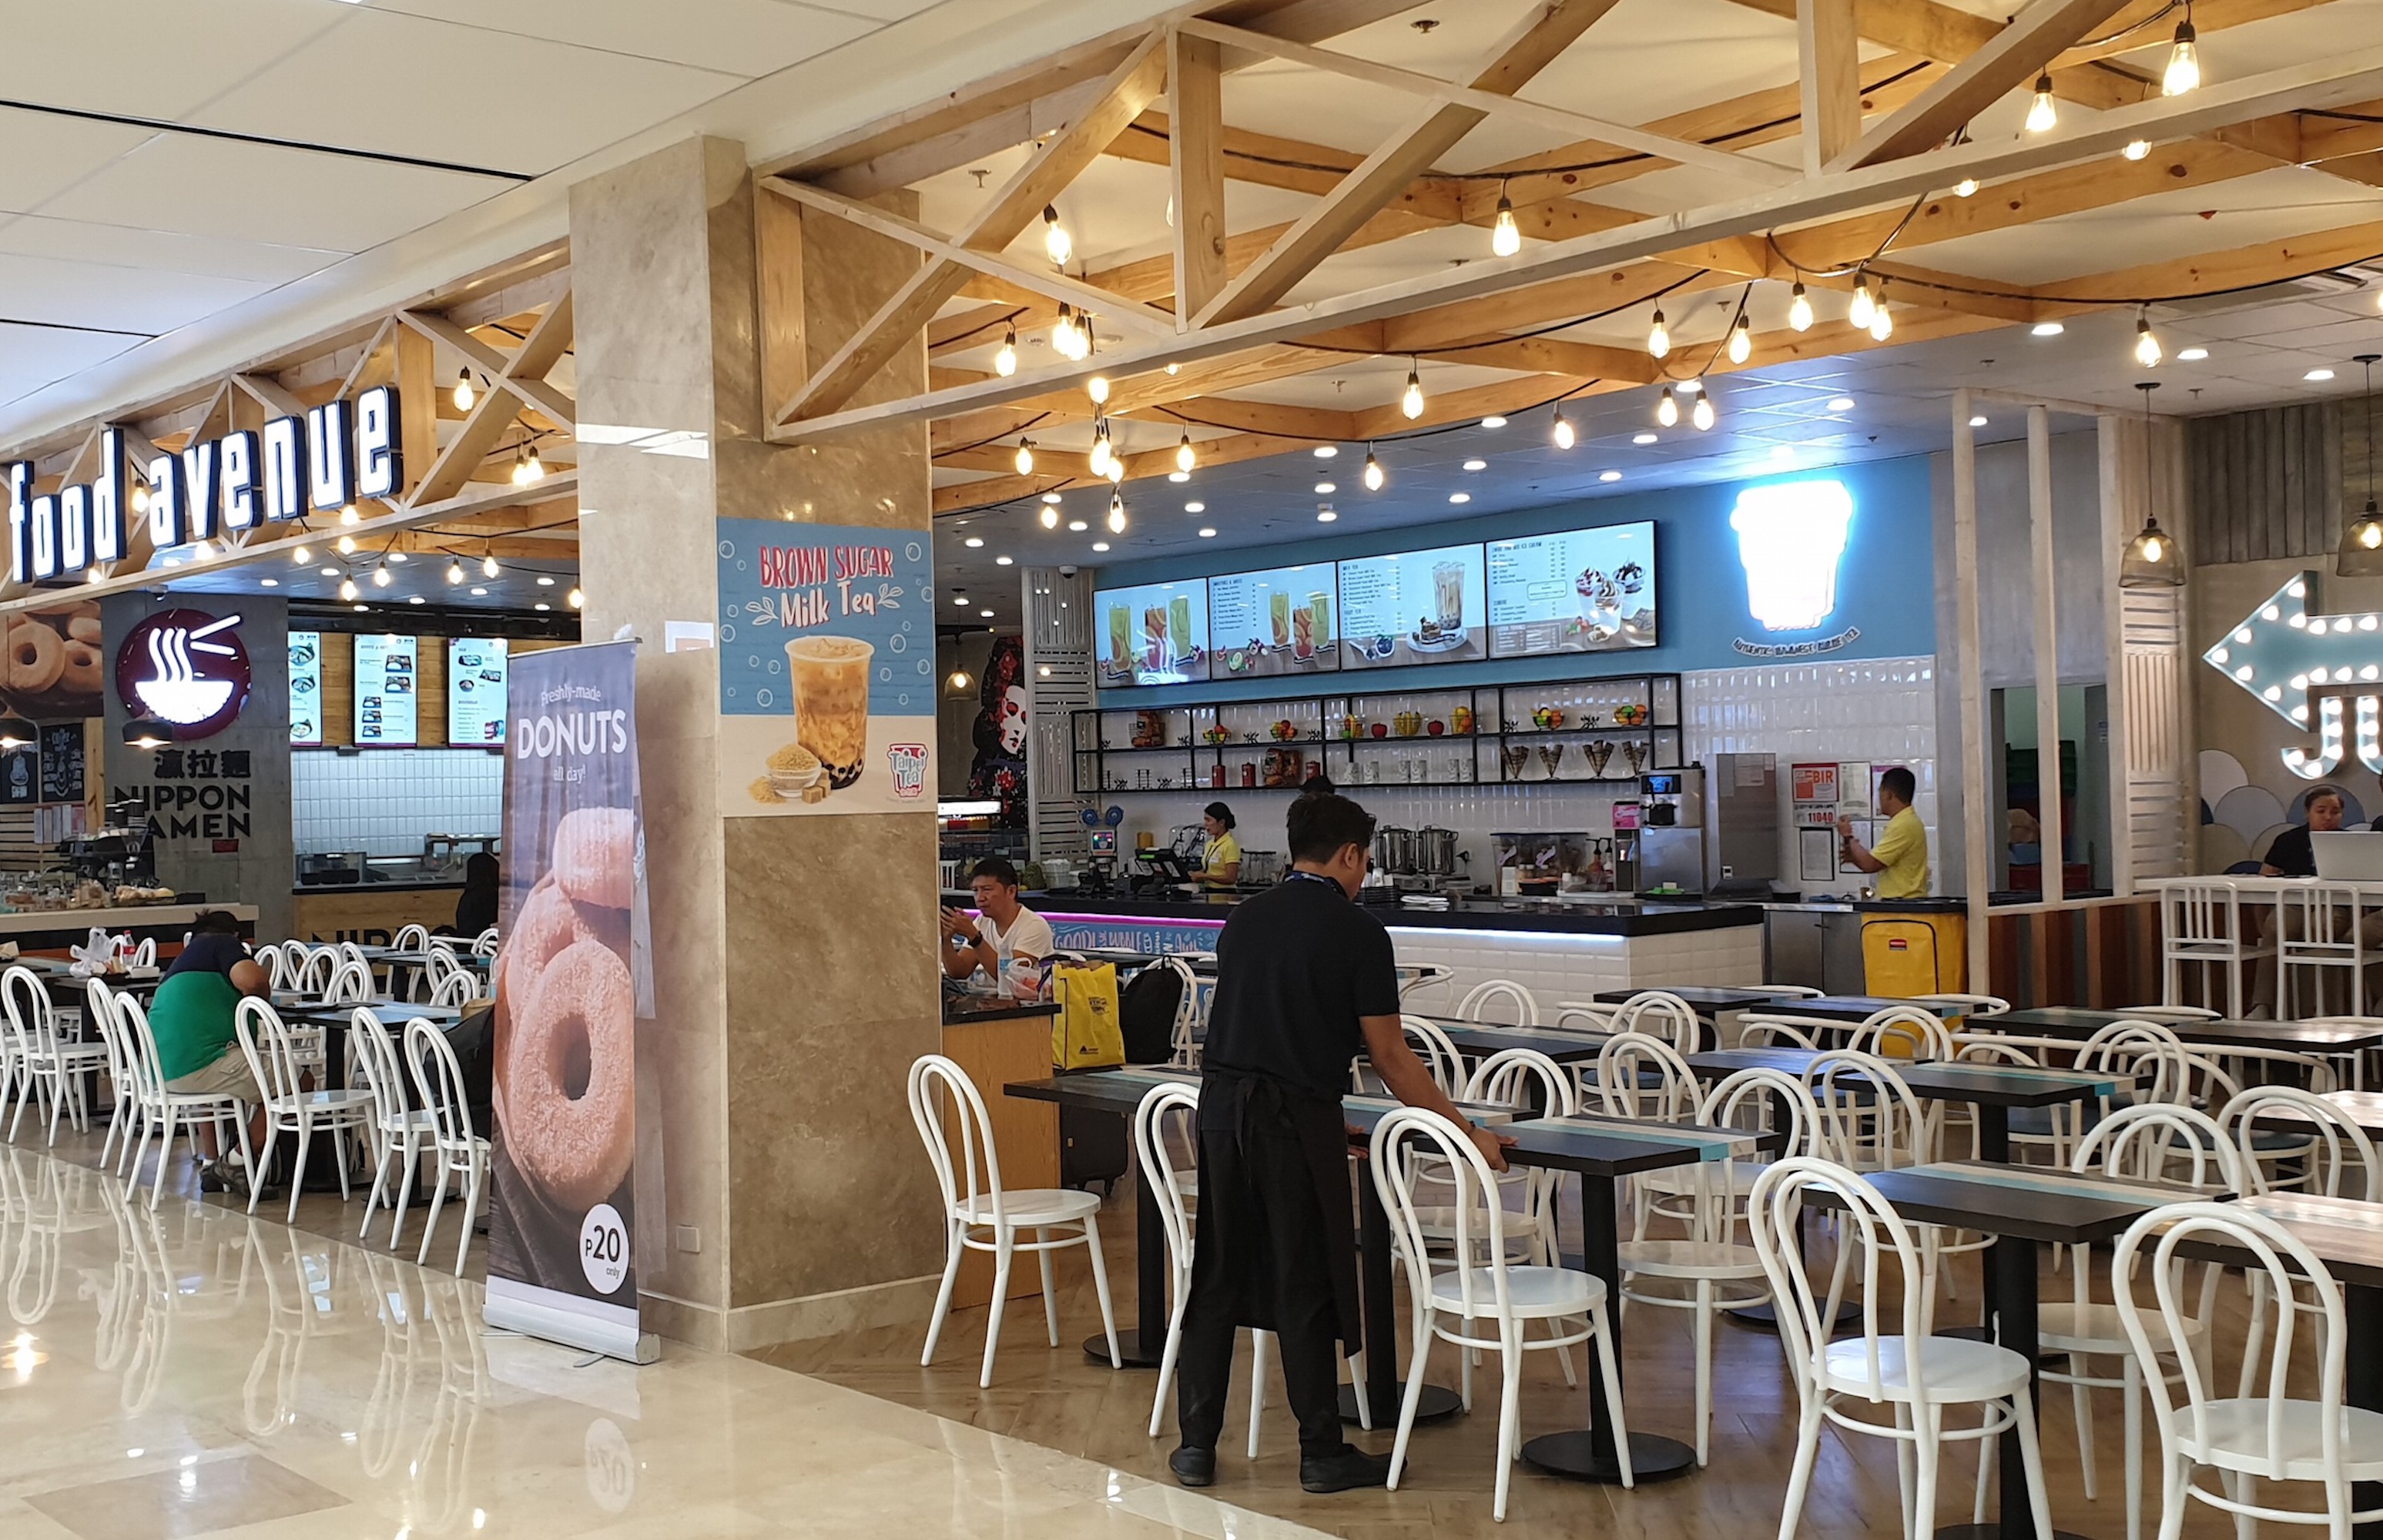 SSP launches second phase of its food and beverage openings at Mactan Cebu International Airport